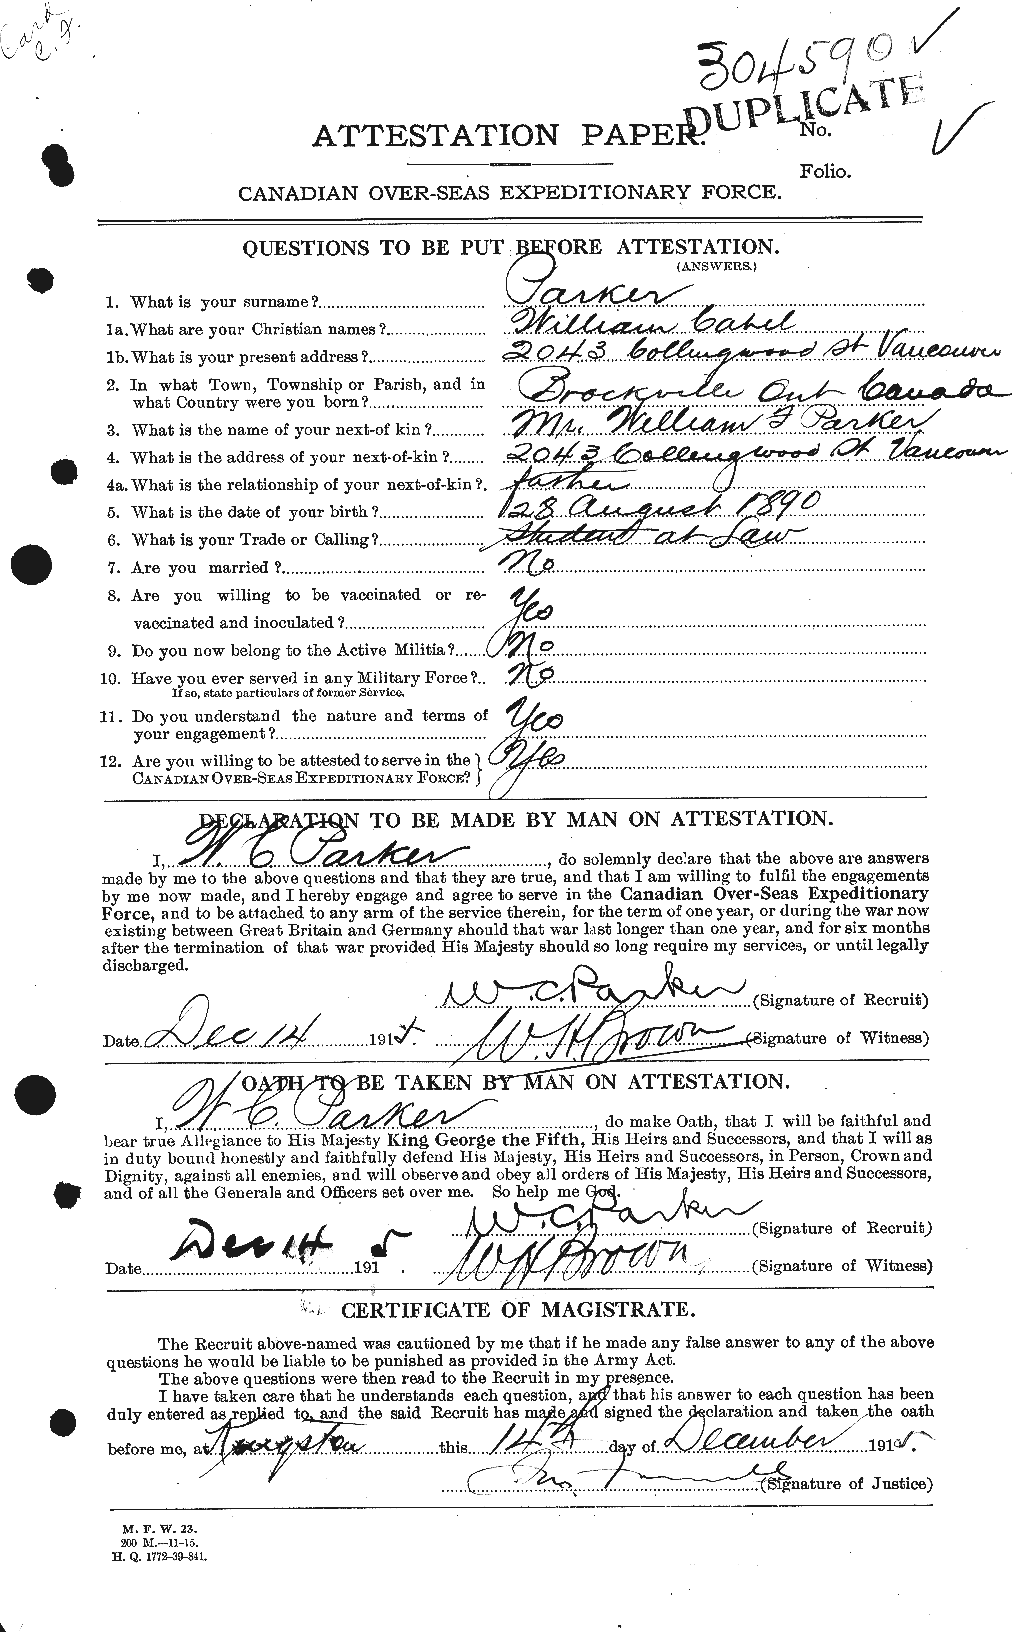 Personnel Records of the First World War - CEF 565733a